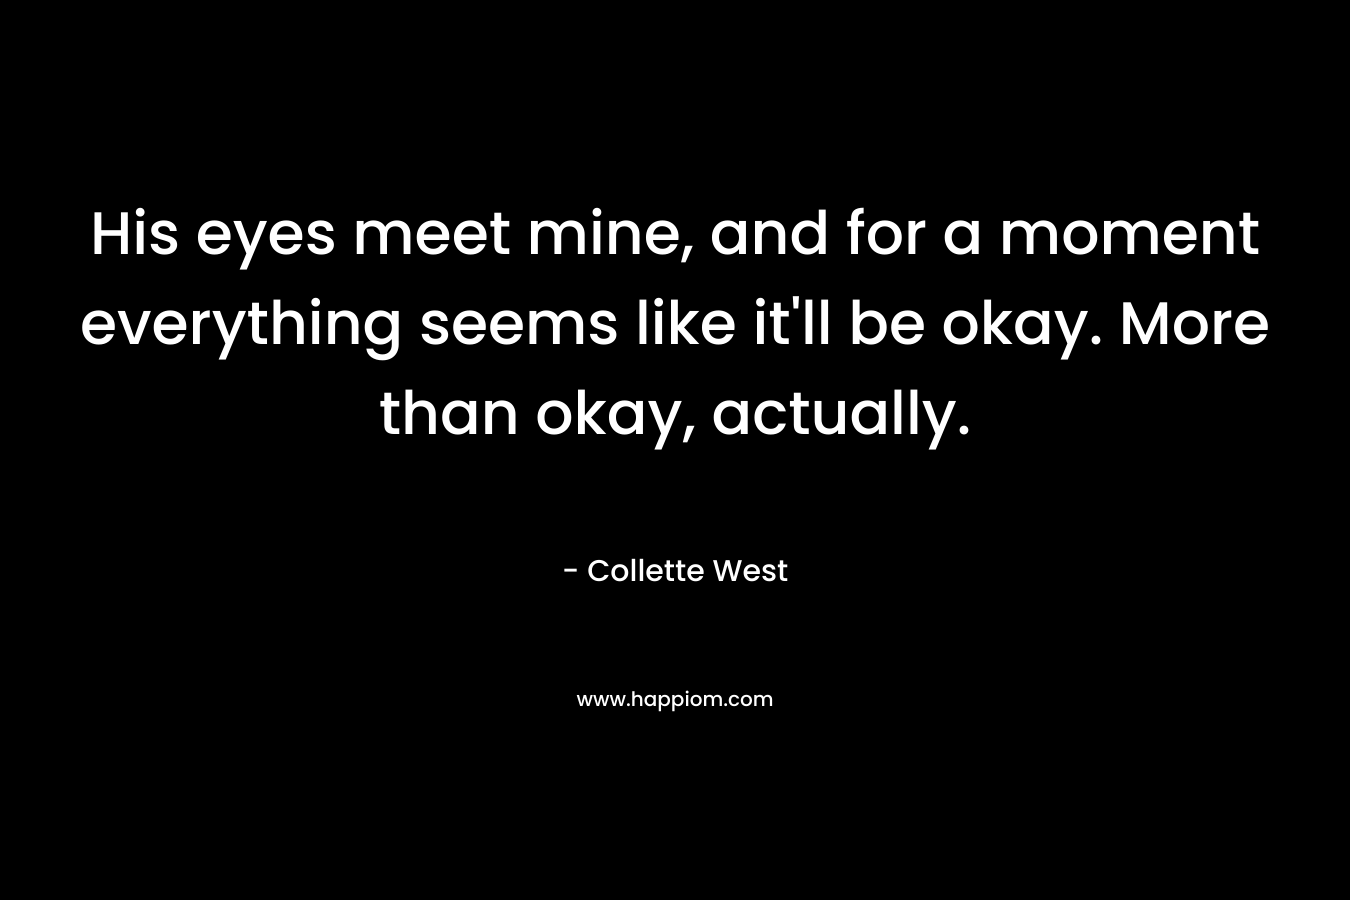 His eyes meet mine, and for a moment everything seems like it’ll be okay. More than okay, actually. – Collette West